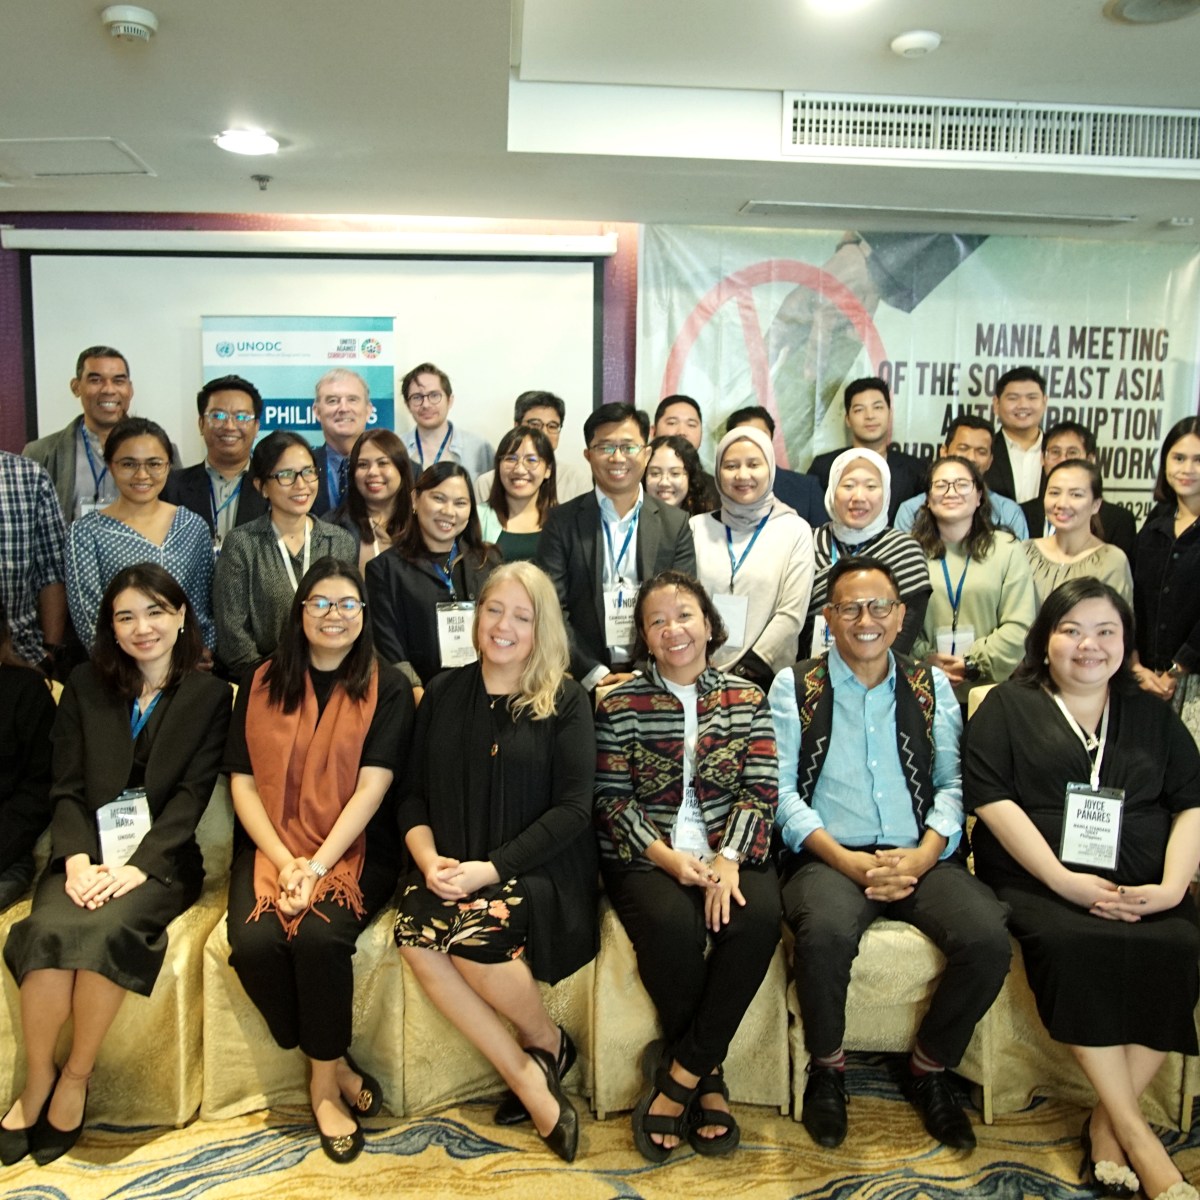 WATCH: Southeast Asian journalists launch new anticorruption network – in photos